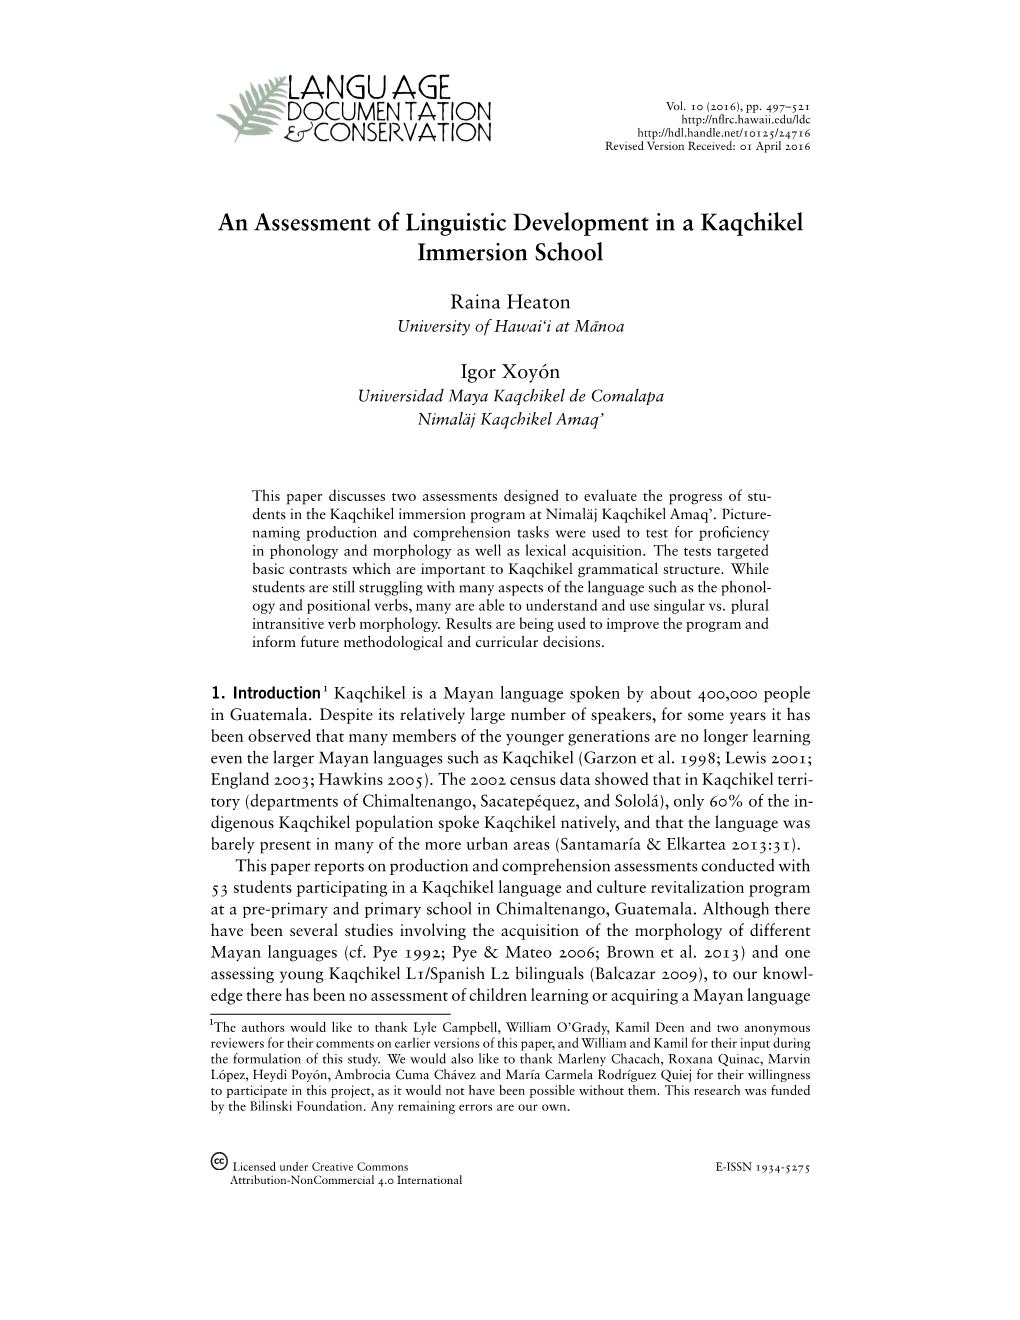 An Assessment of Linguistic Development in a Kaqchikel Immersion School